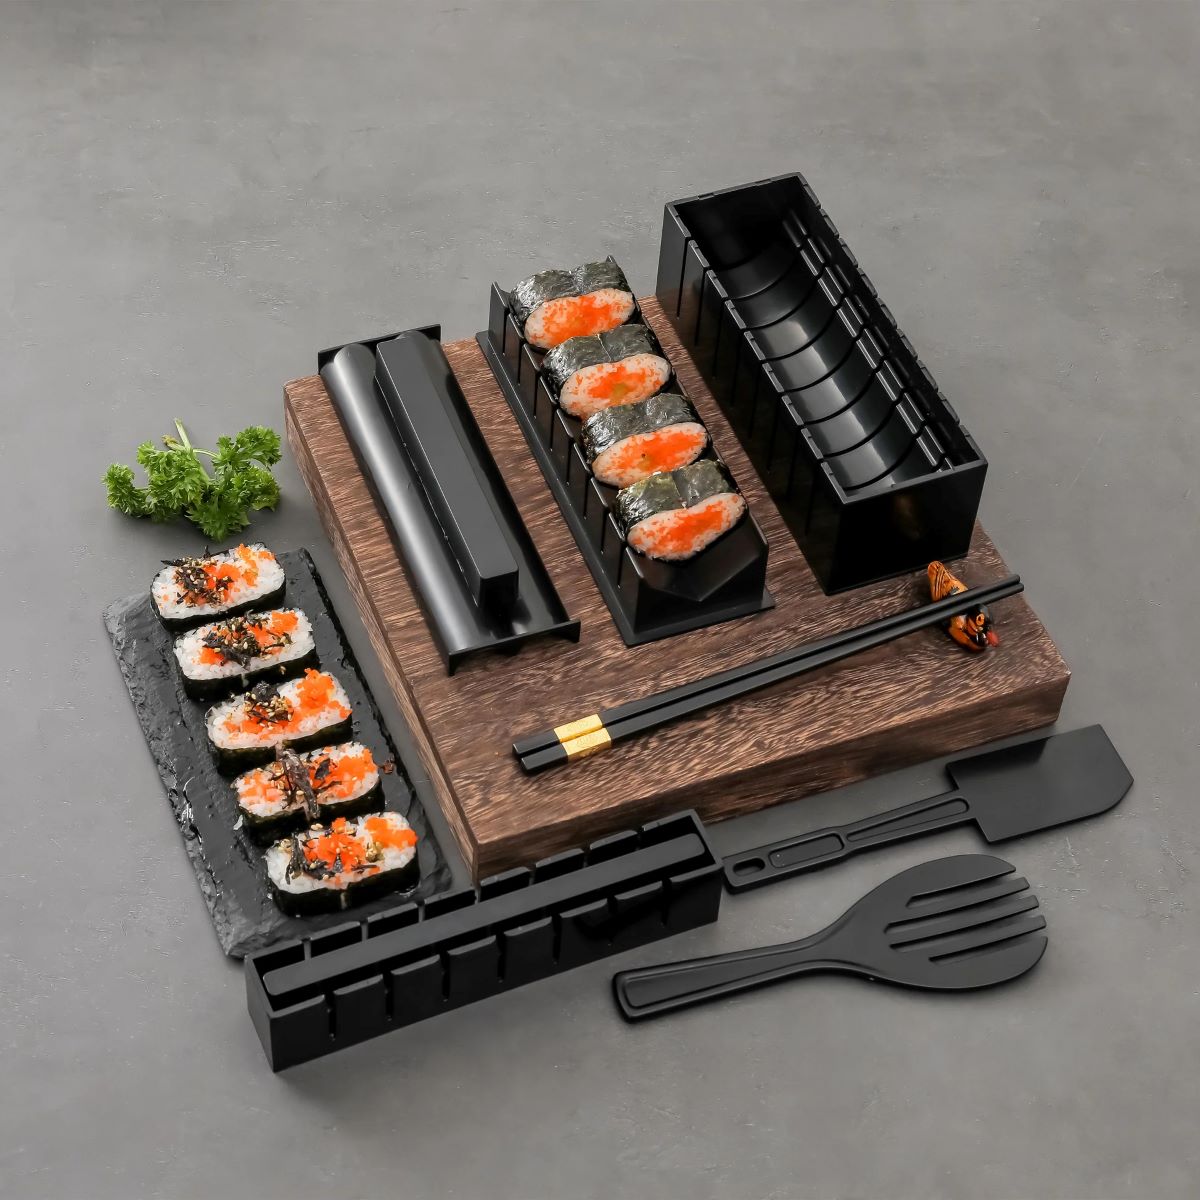 Sushi Making Kit Review: A Must-Have for Homemade Sushi Enthusiasts